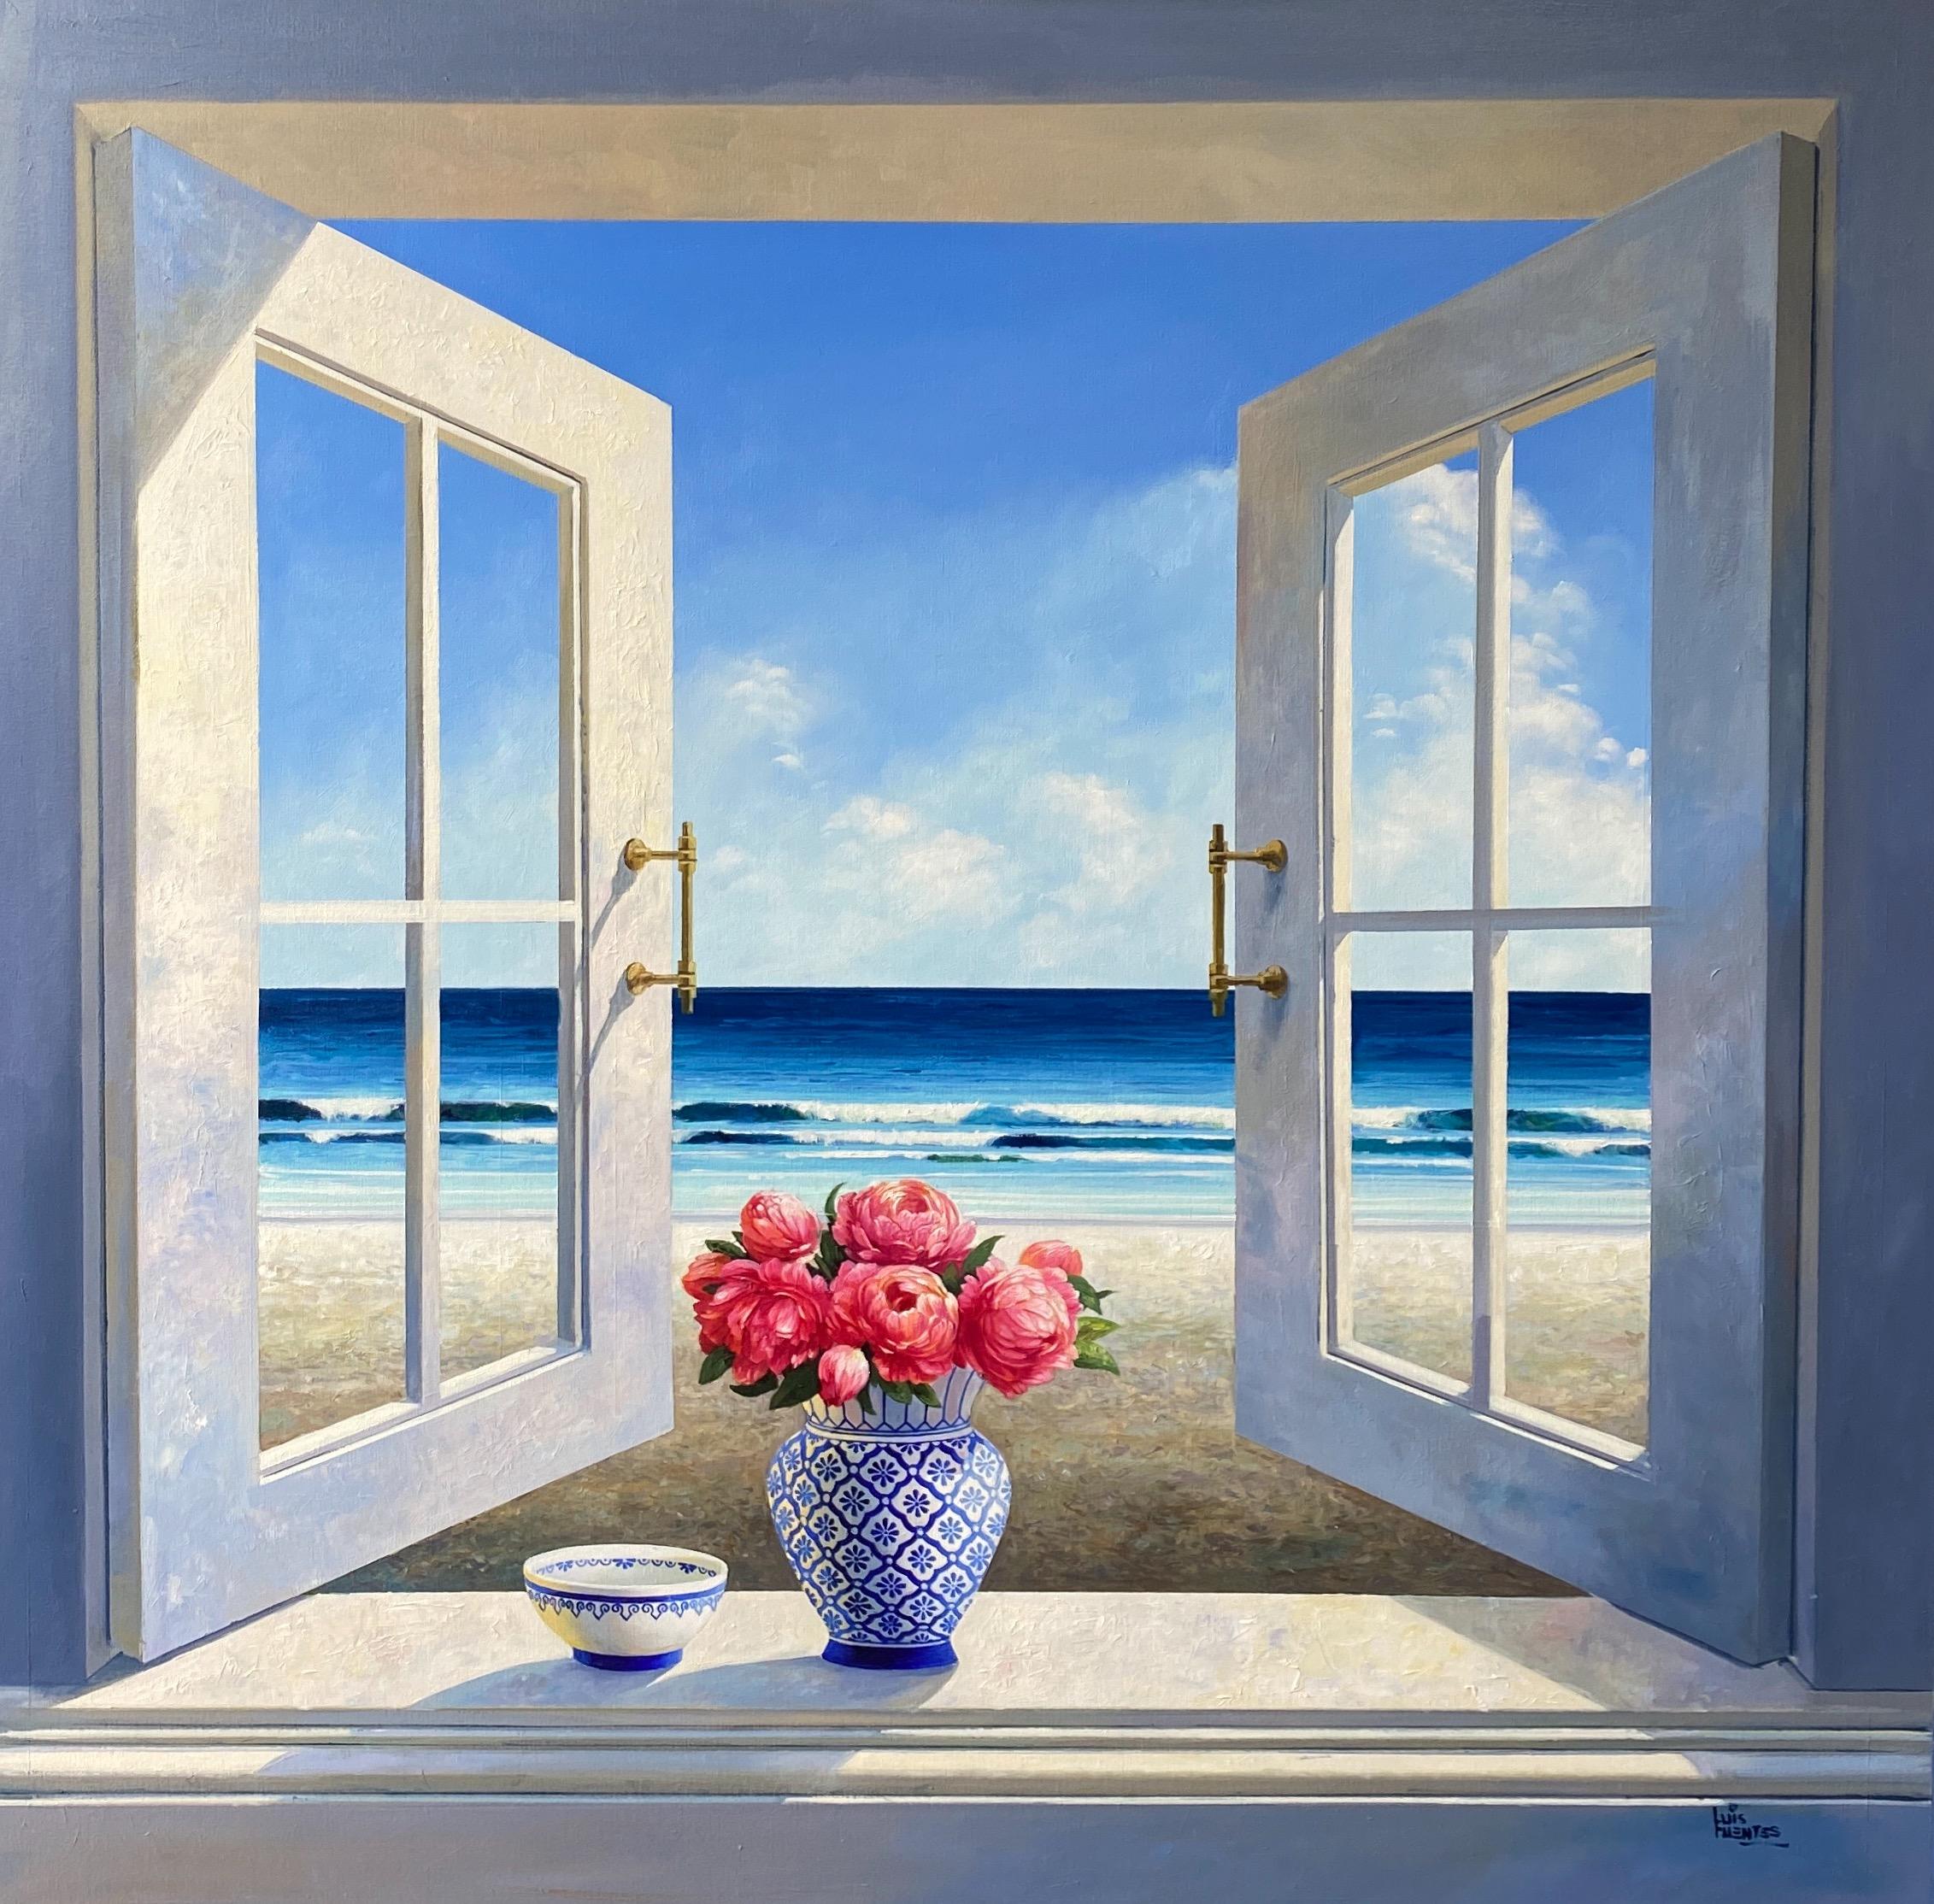 Luis Fuentes Figurative Painting - Summer view with peonies - Original oil painting - Contemporary art